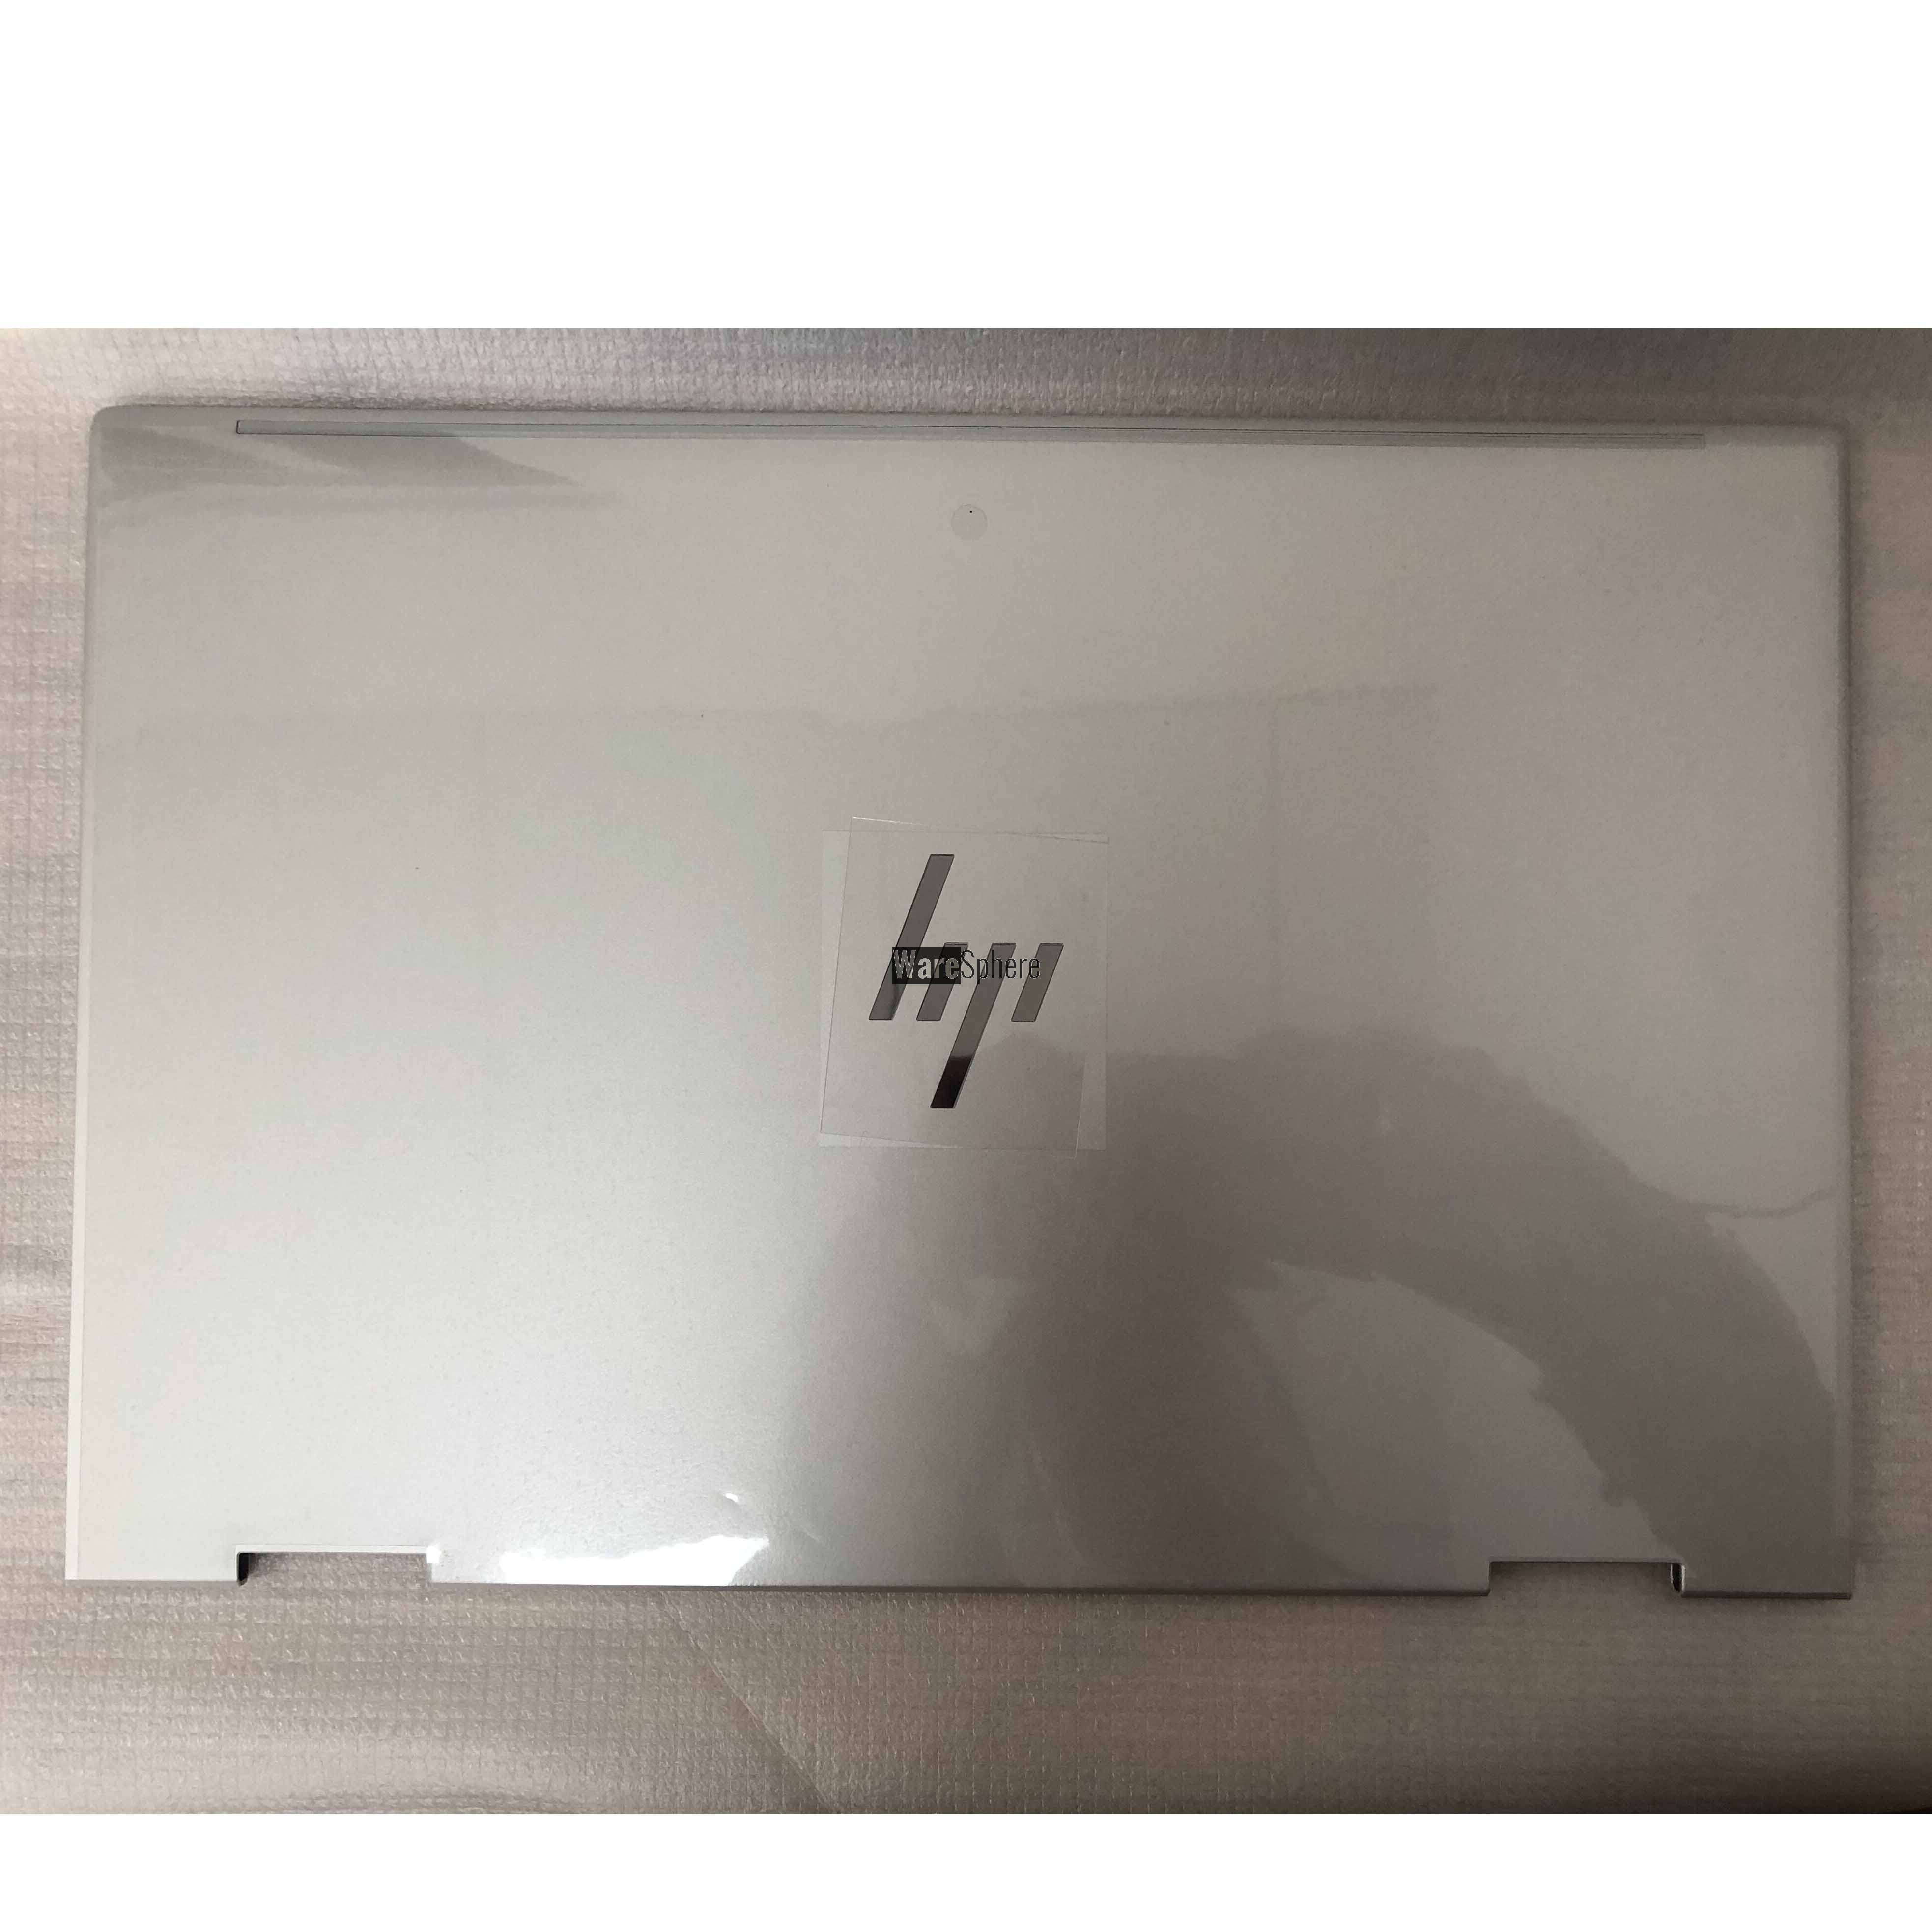 LCD Back Cover for HP EliteBook X360 830 G8 6070B1859301 THIN Silver